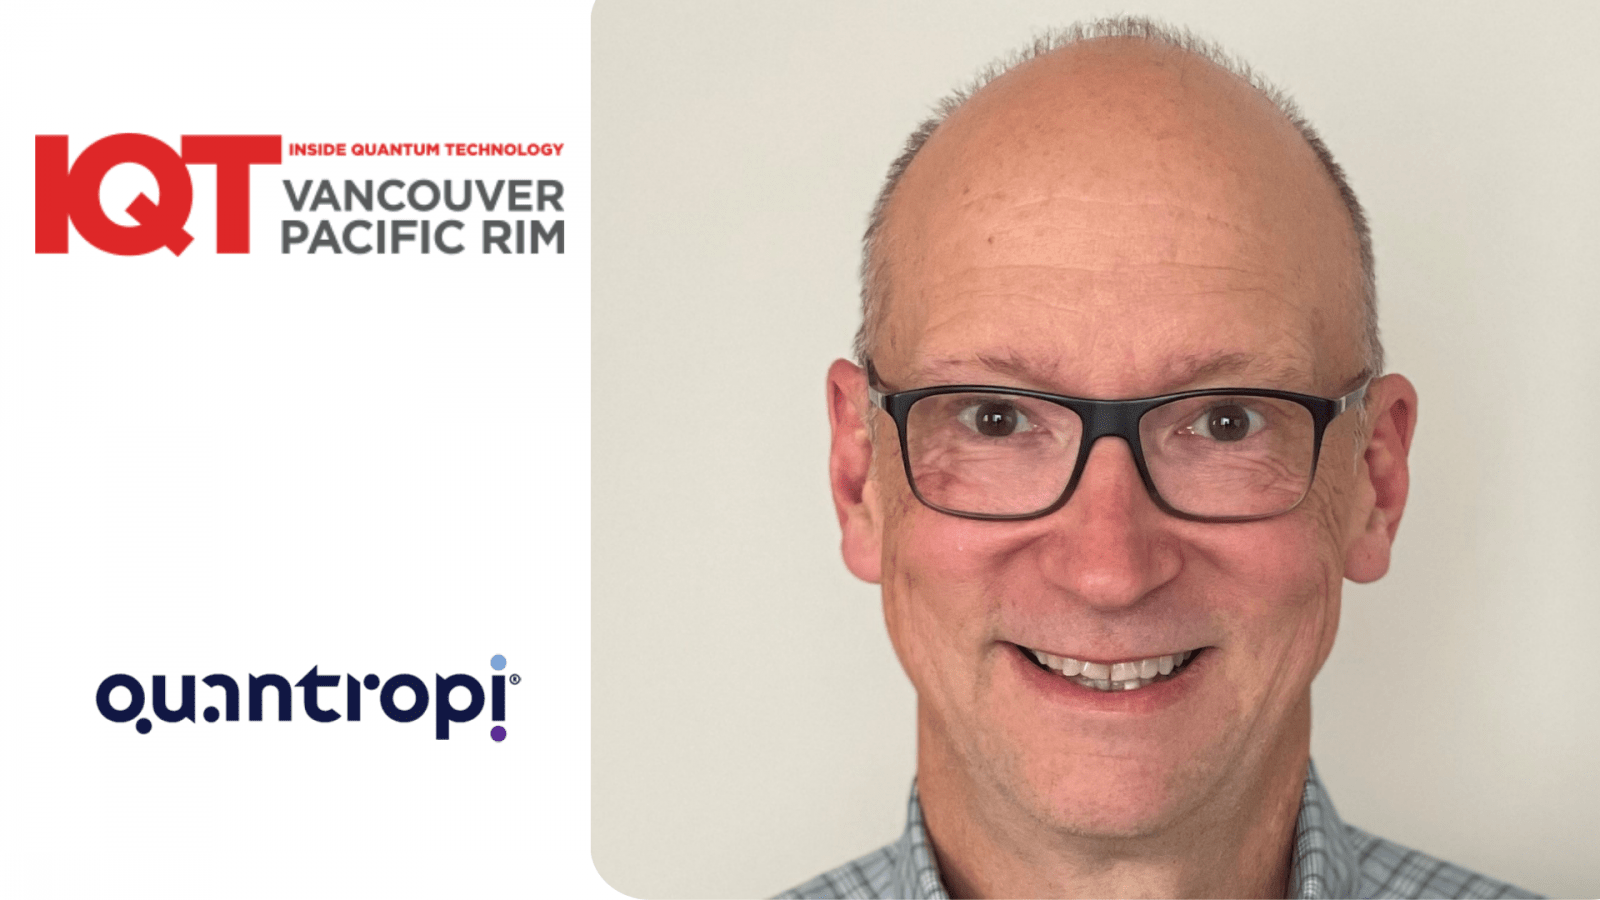 Michael Redding, CTO of Quantropi, is a 2024 Speaker for the IQT Vancouver/Pacific Rim conference in June 2024